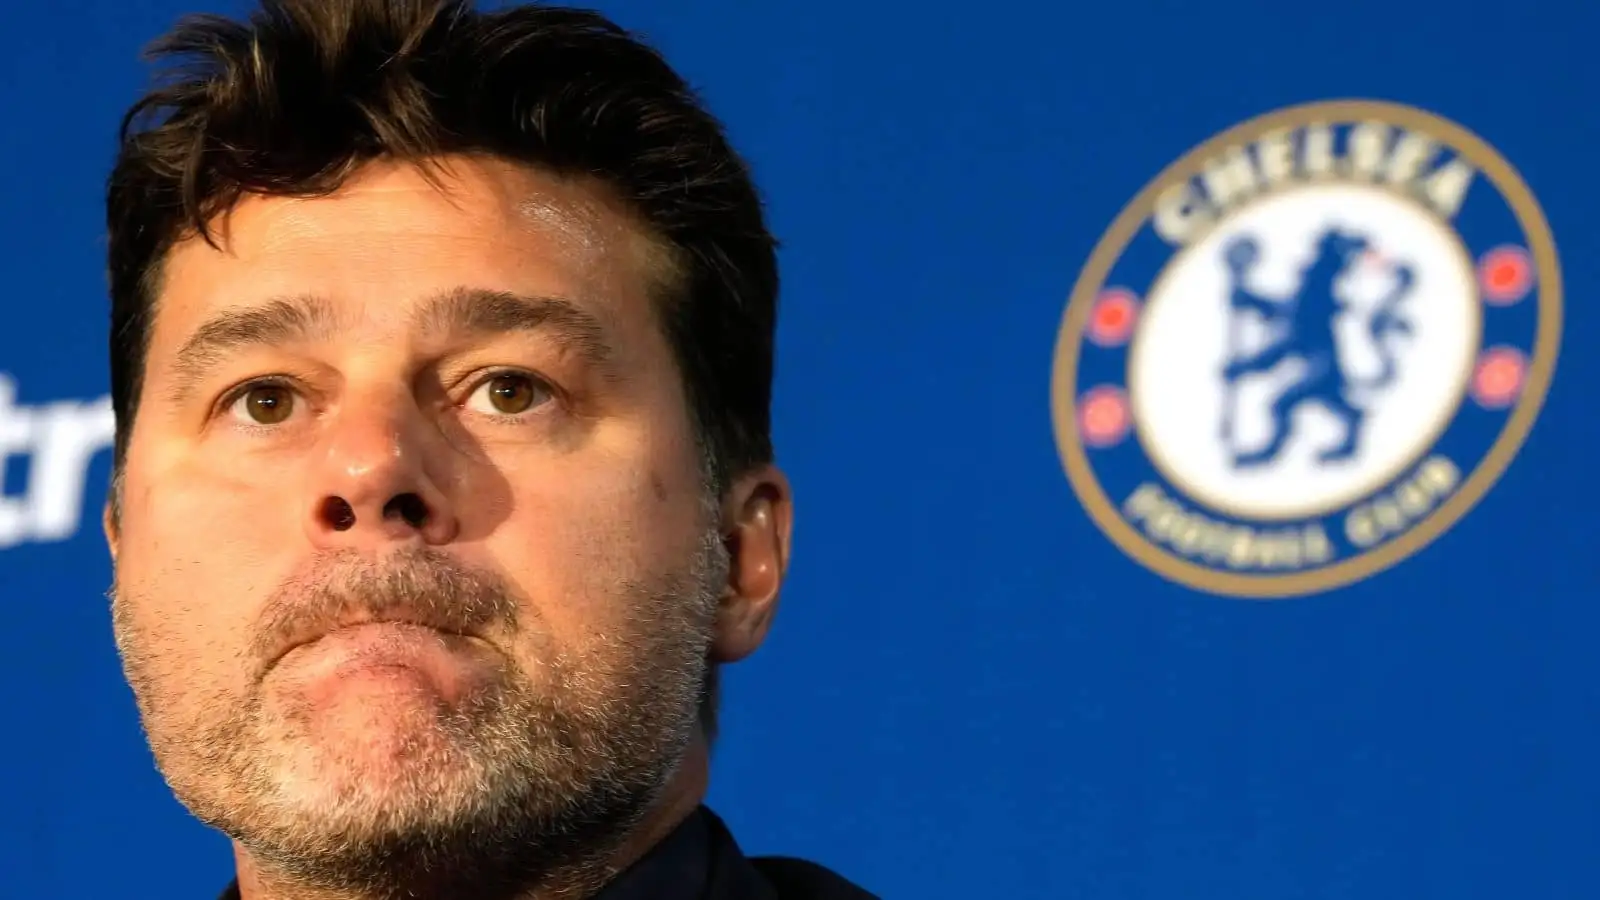 Mauricio Pochettino, the new Chelsea manager, during a press conference at Stamford Bridge to present him to the media